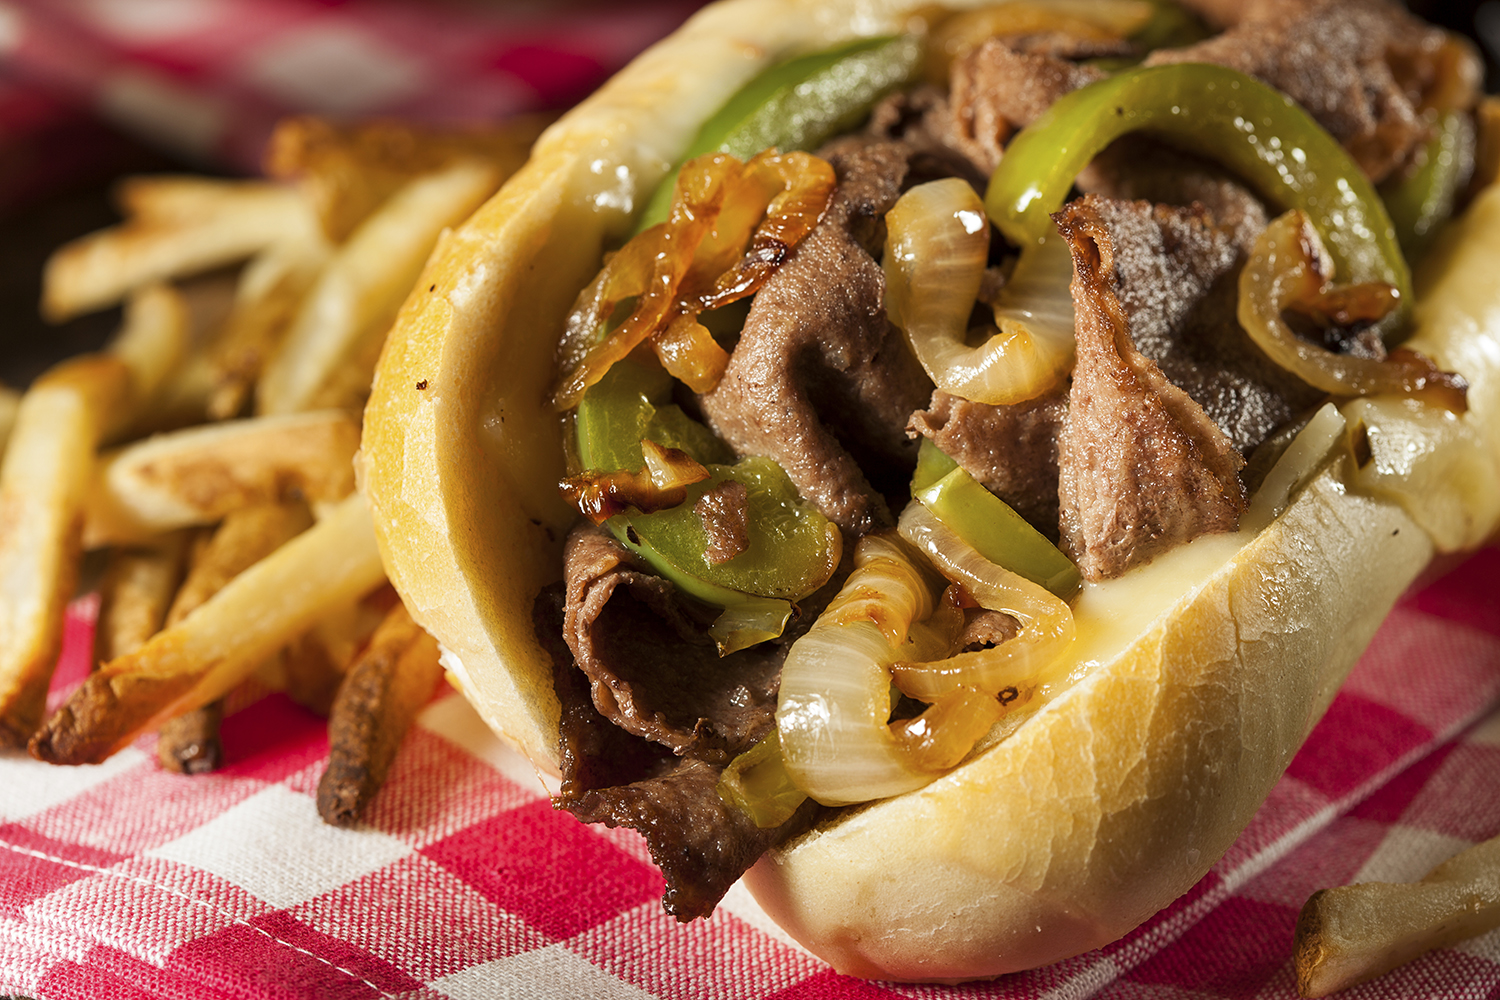 Philly cheesesteak, the city's classic gut-busting sandwich © bhofack2 / Getty Images